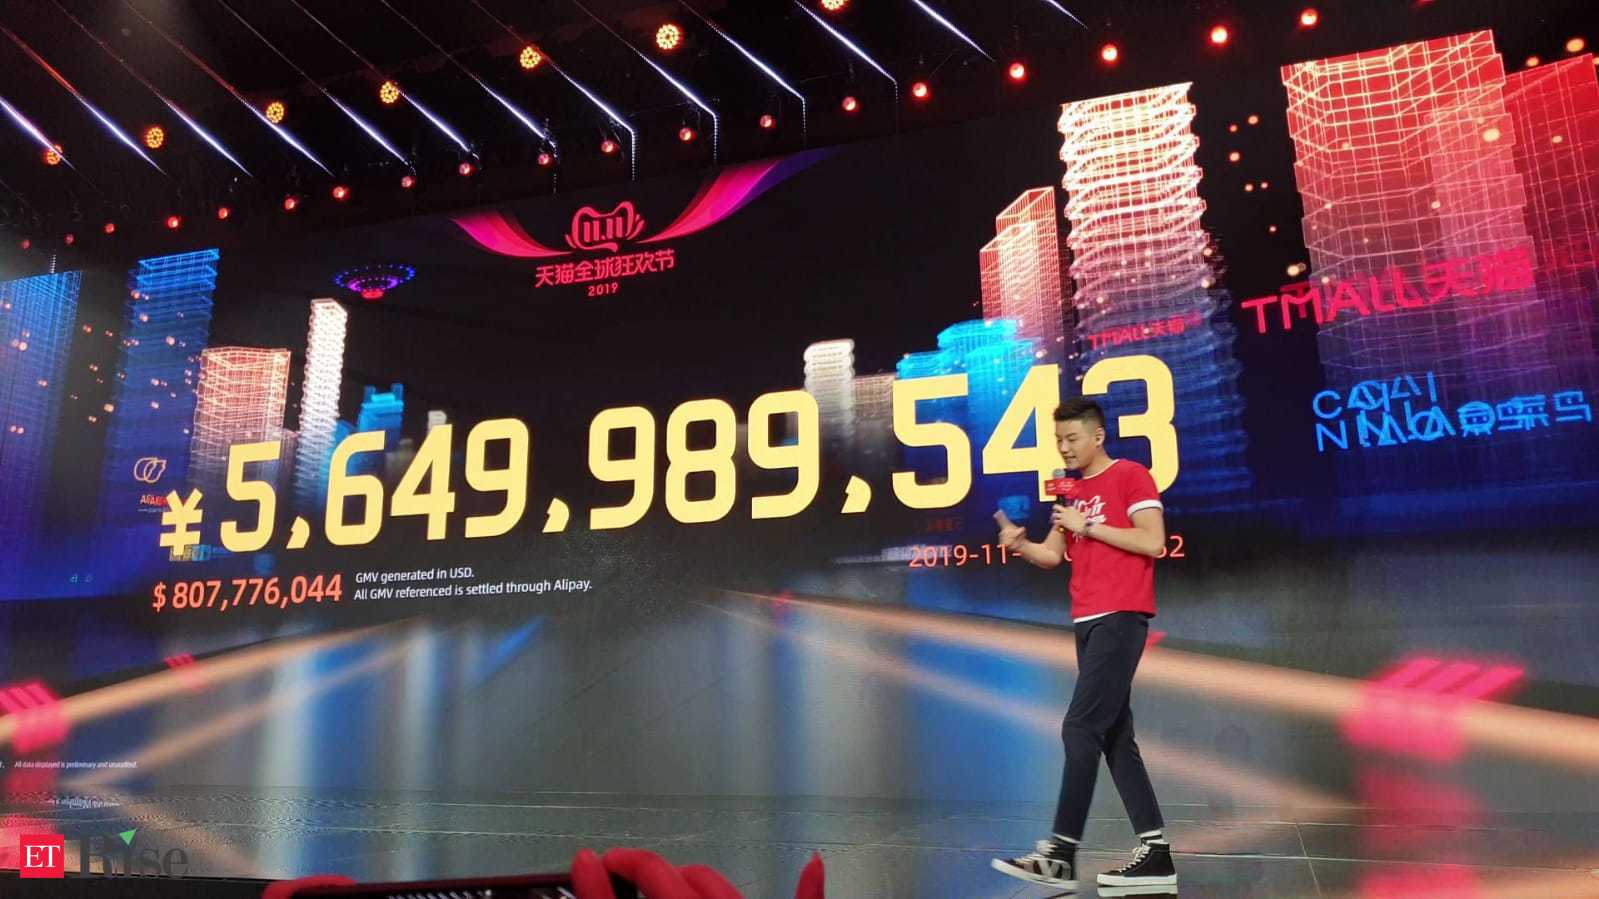 Alibaba Single day sale: Alibaba Singles' Day sales touch $1 billion in 1  minute, $16.3 billion in less than 90 minutes